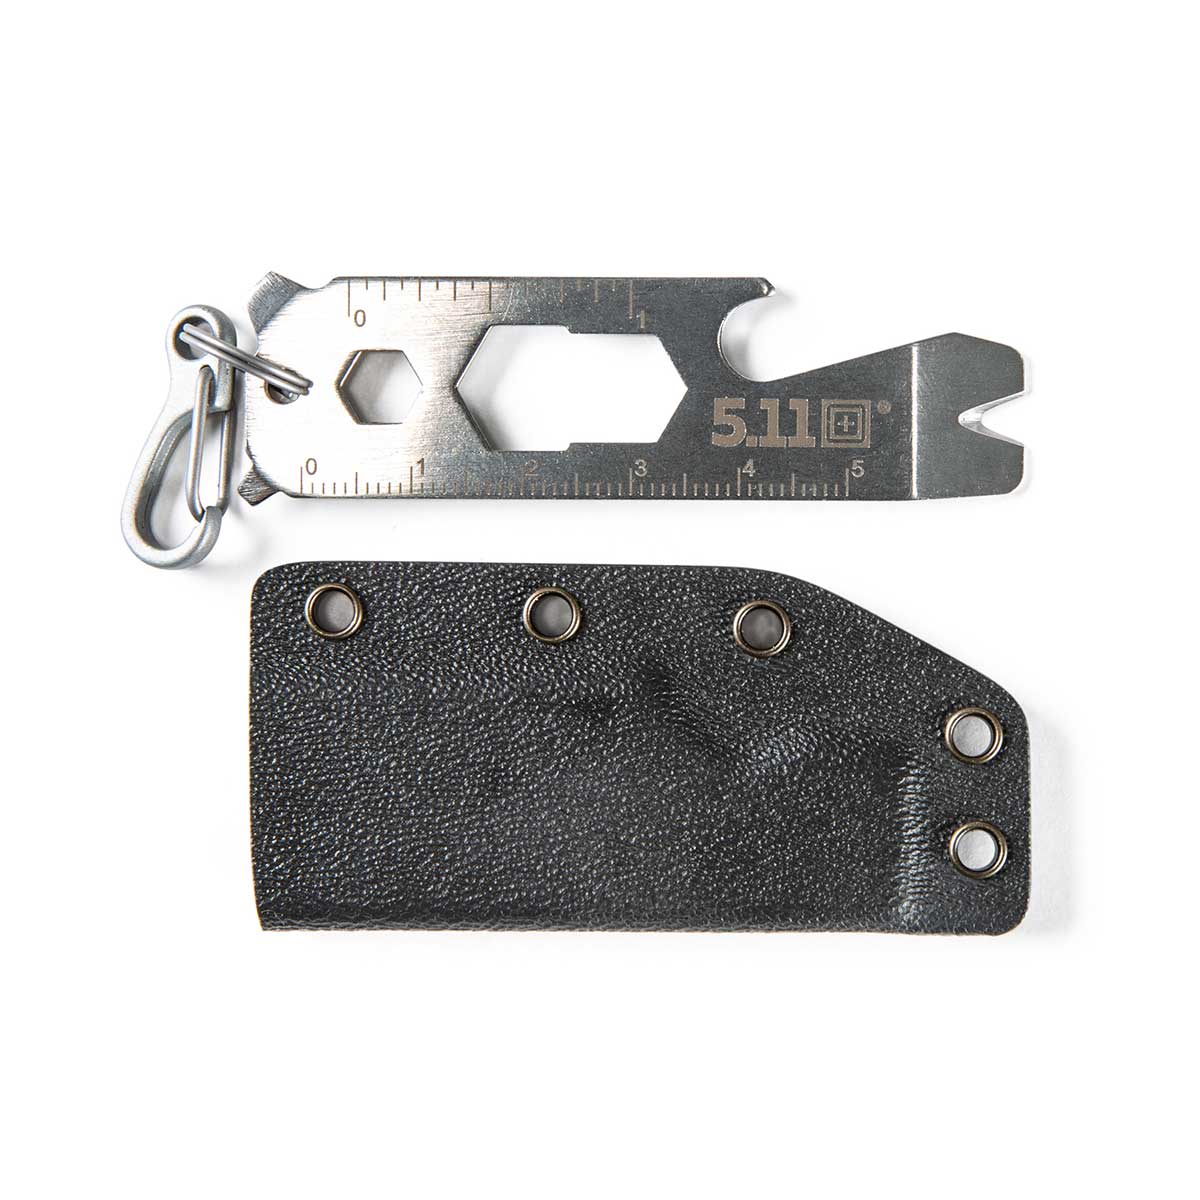 EDT Multitool  5.11 Tactical